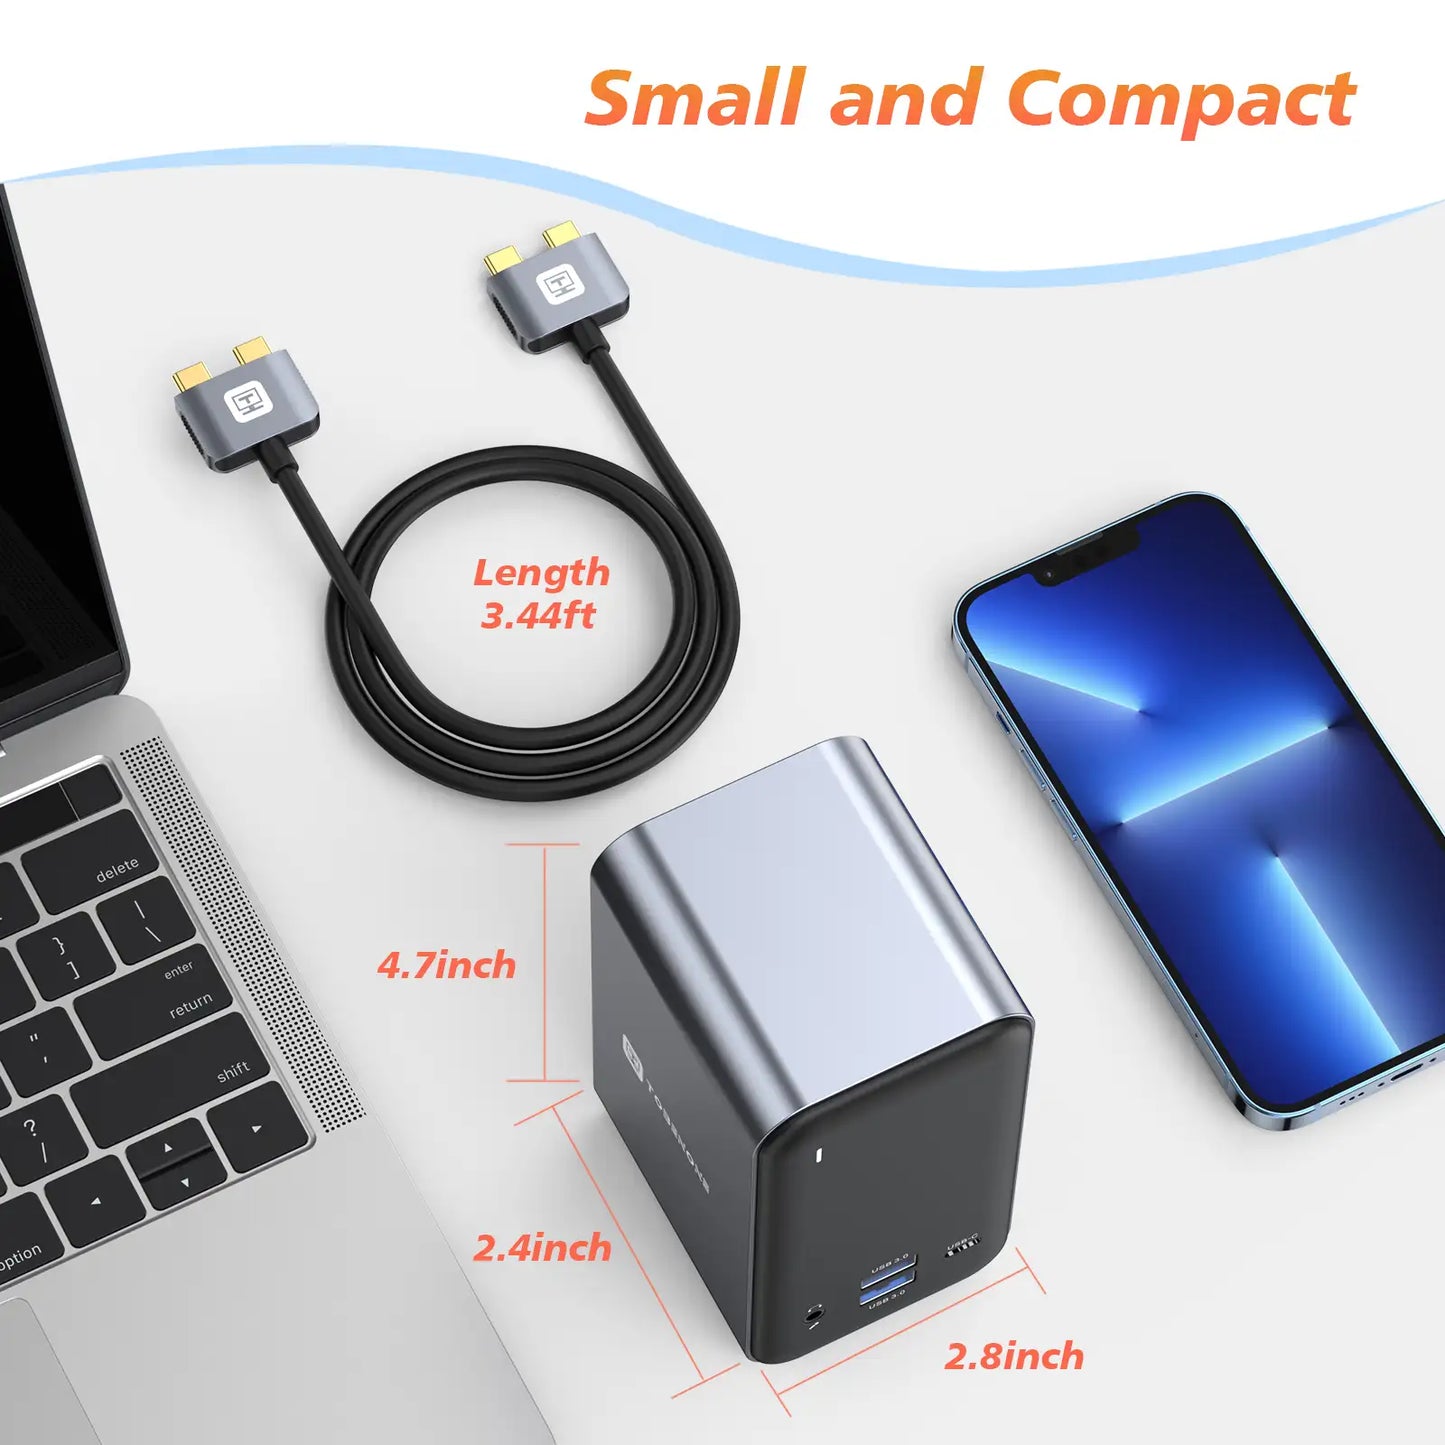 Tobenone usb c macbook pro docking station with small and compact size